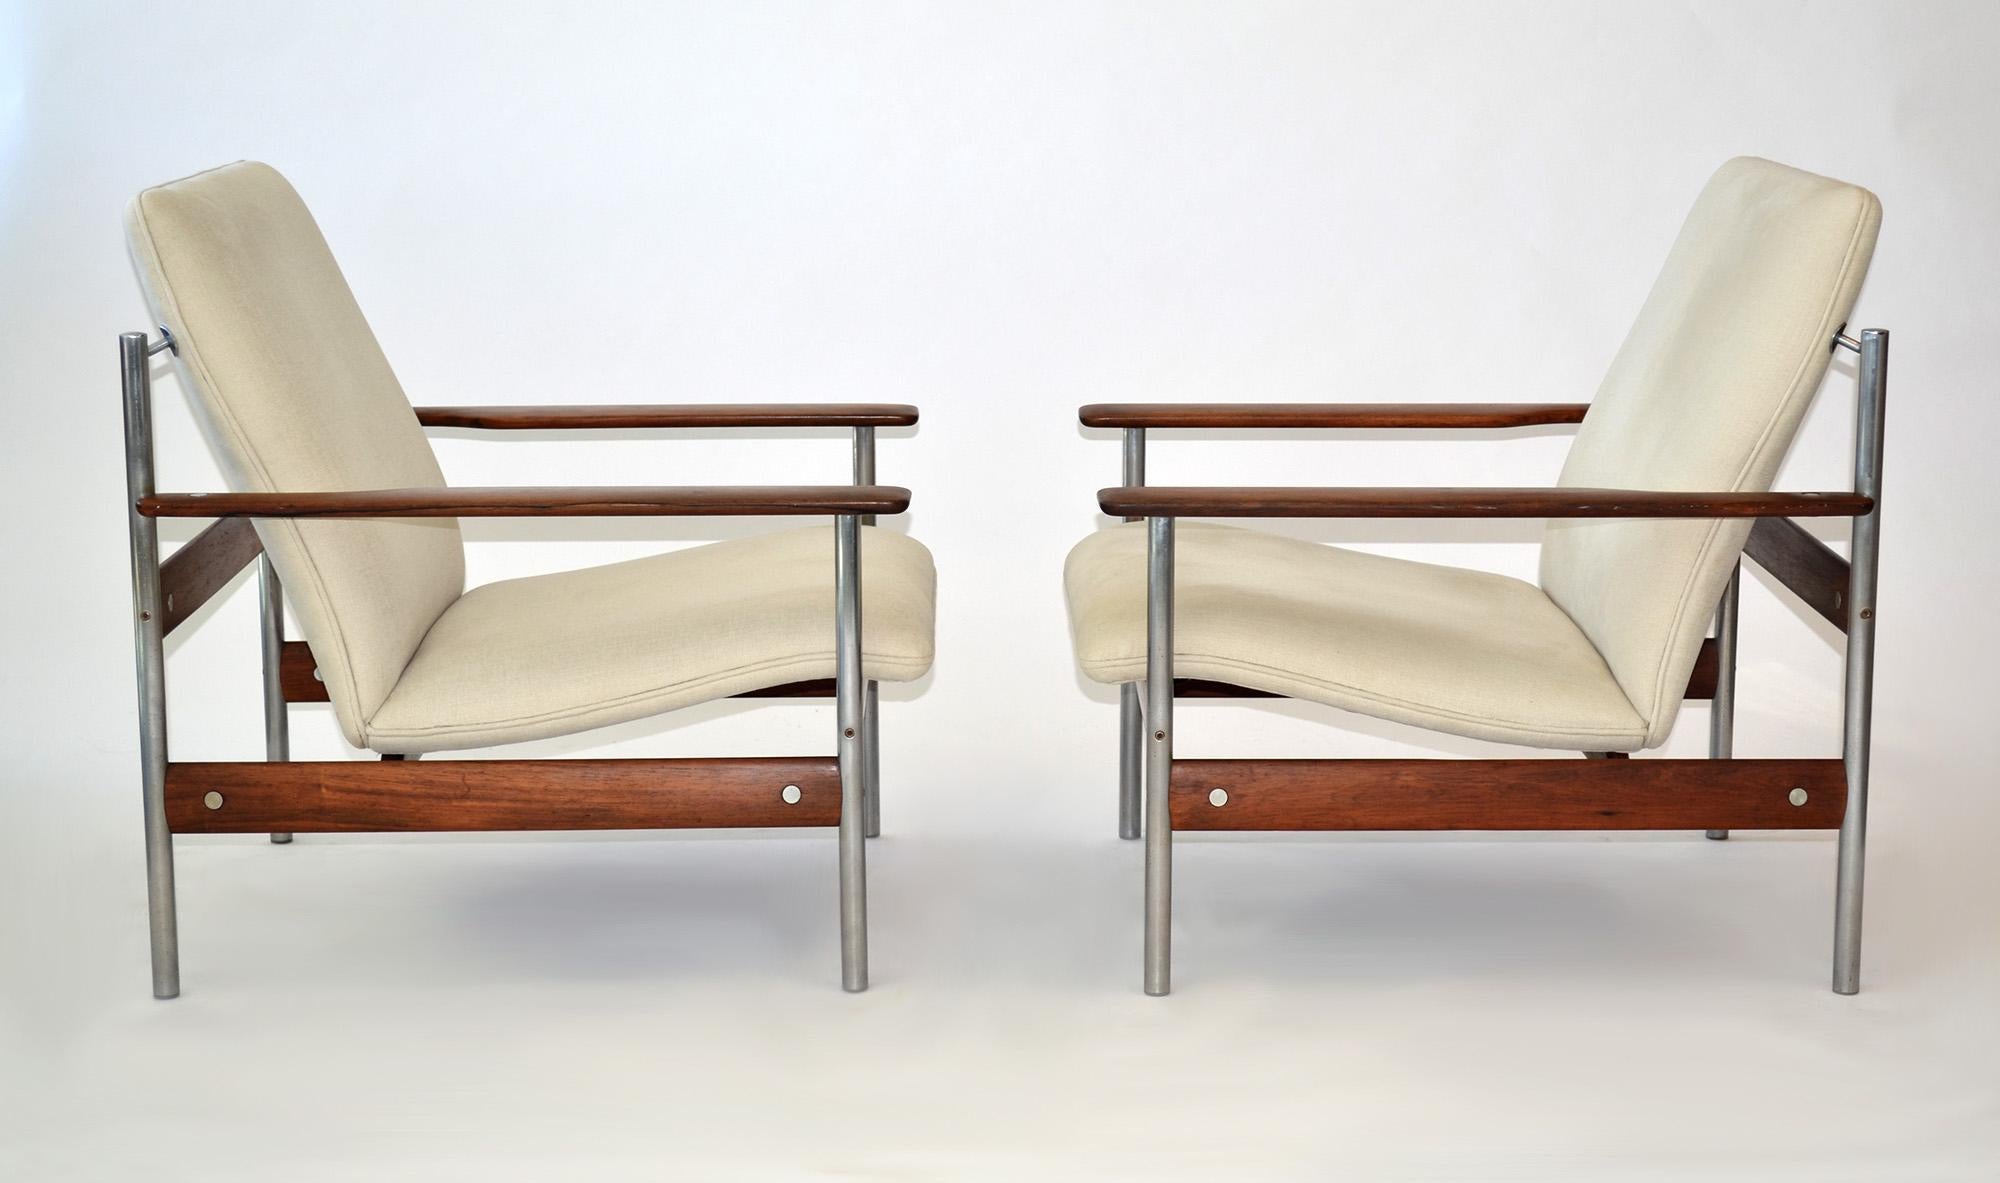 Pair of Scandinavian Modern Rosewood 1001 AF Armchairs by Sven Dysthe for Dokka 

Pair of 1001 AF armchairs by Sven Dysthe for Dokka Mobelfabrik, Norway 1960s
1001 AF Scandinavian armchairs. Designed and manufactured in the early 1960s by Sven Ivar